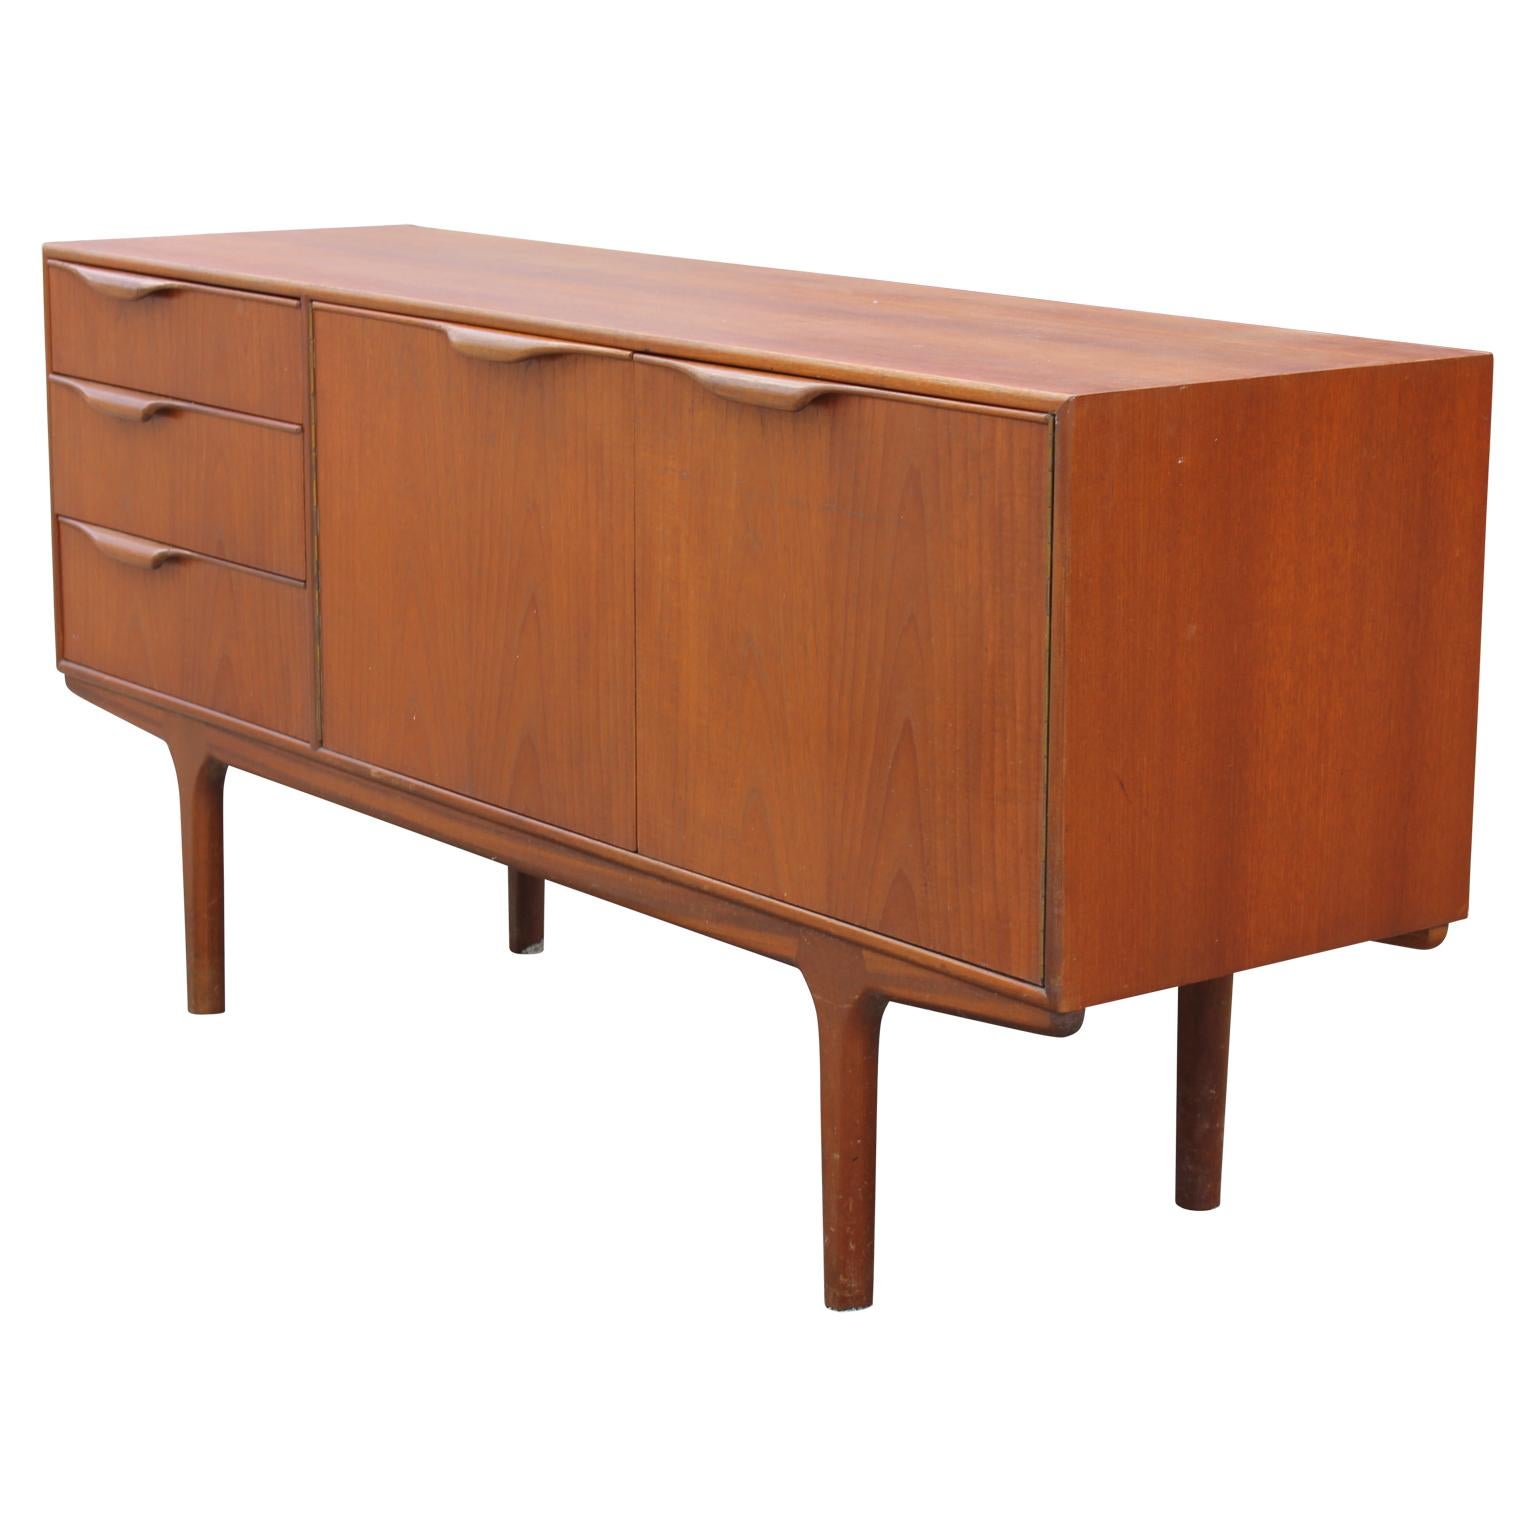 Modern teak credenza designed by Tom Roberston for McIntosh. The piece has three drawers for storage space. In the top drawer, it is lined with red velvet and have a silverware tray. The two swing-out drawers reveal two shelves with the top being an